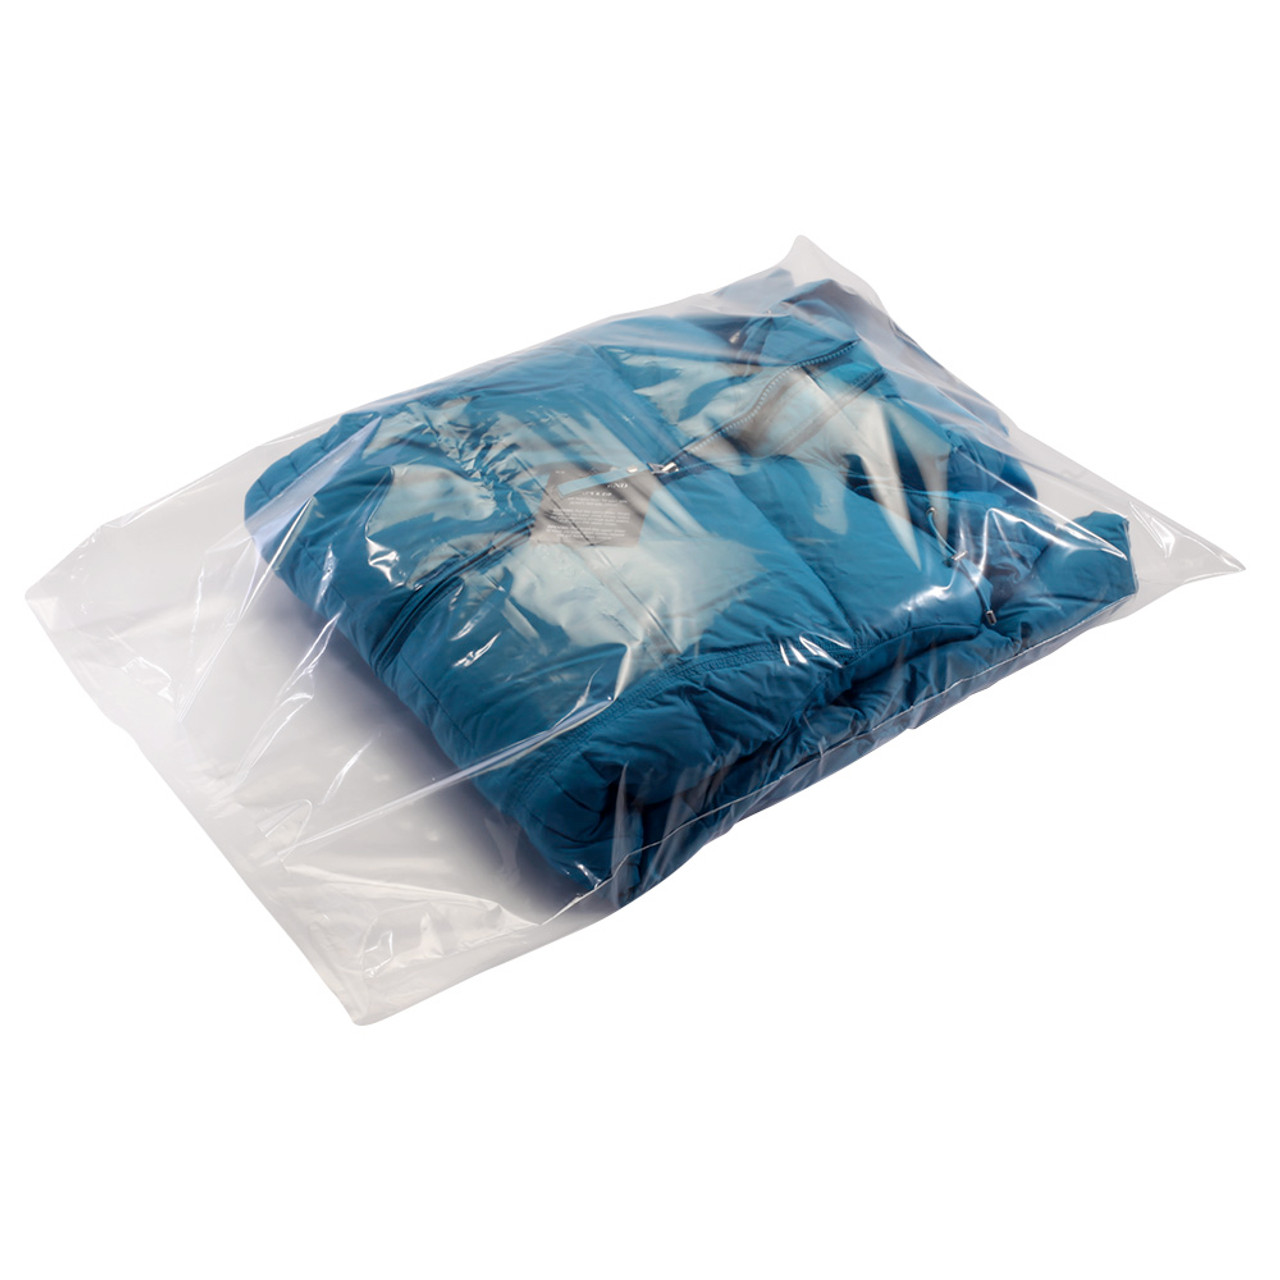 9X16 - 1.5 mil - clear - layflat poly bags - 1000 bags/case